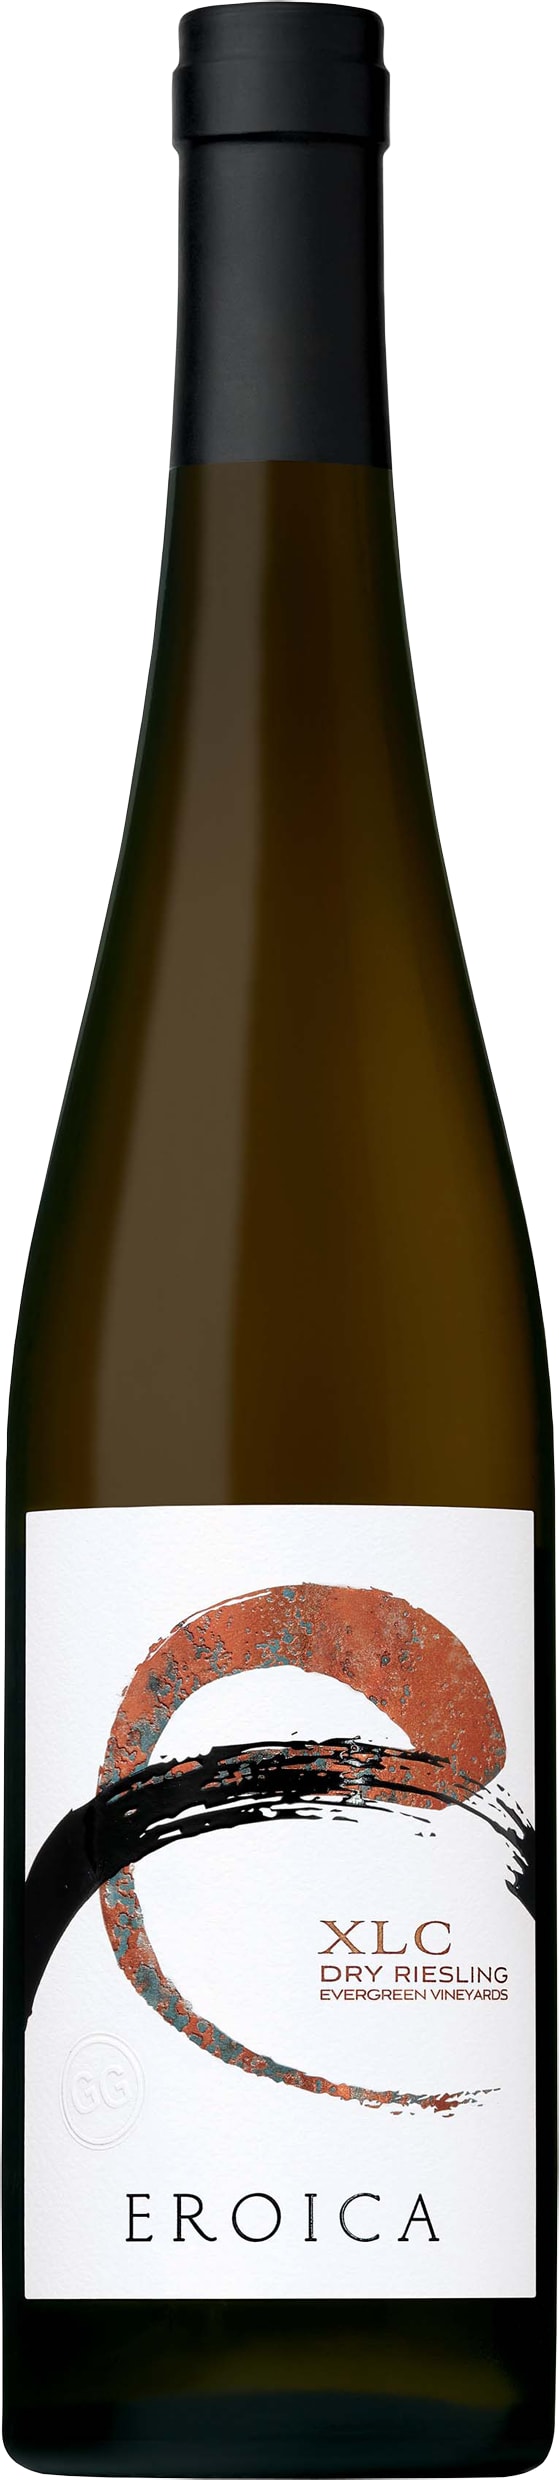 Chateau Ste Michelle Eroica XLC Dry Riesling 2018 75cl - Buy Chateau Ste Michelle Wines from GREAT WINES DIRECT wine shop